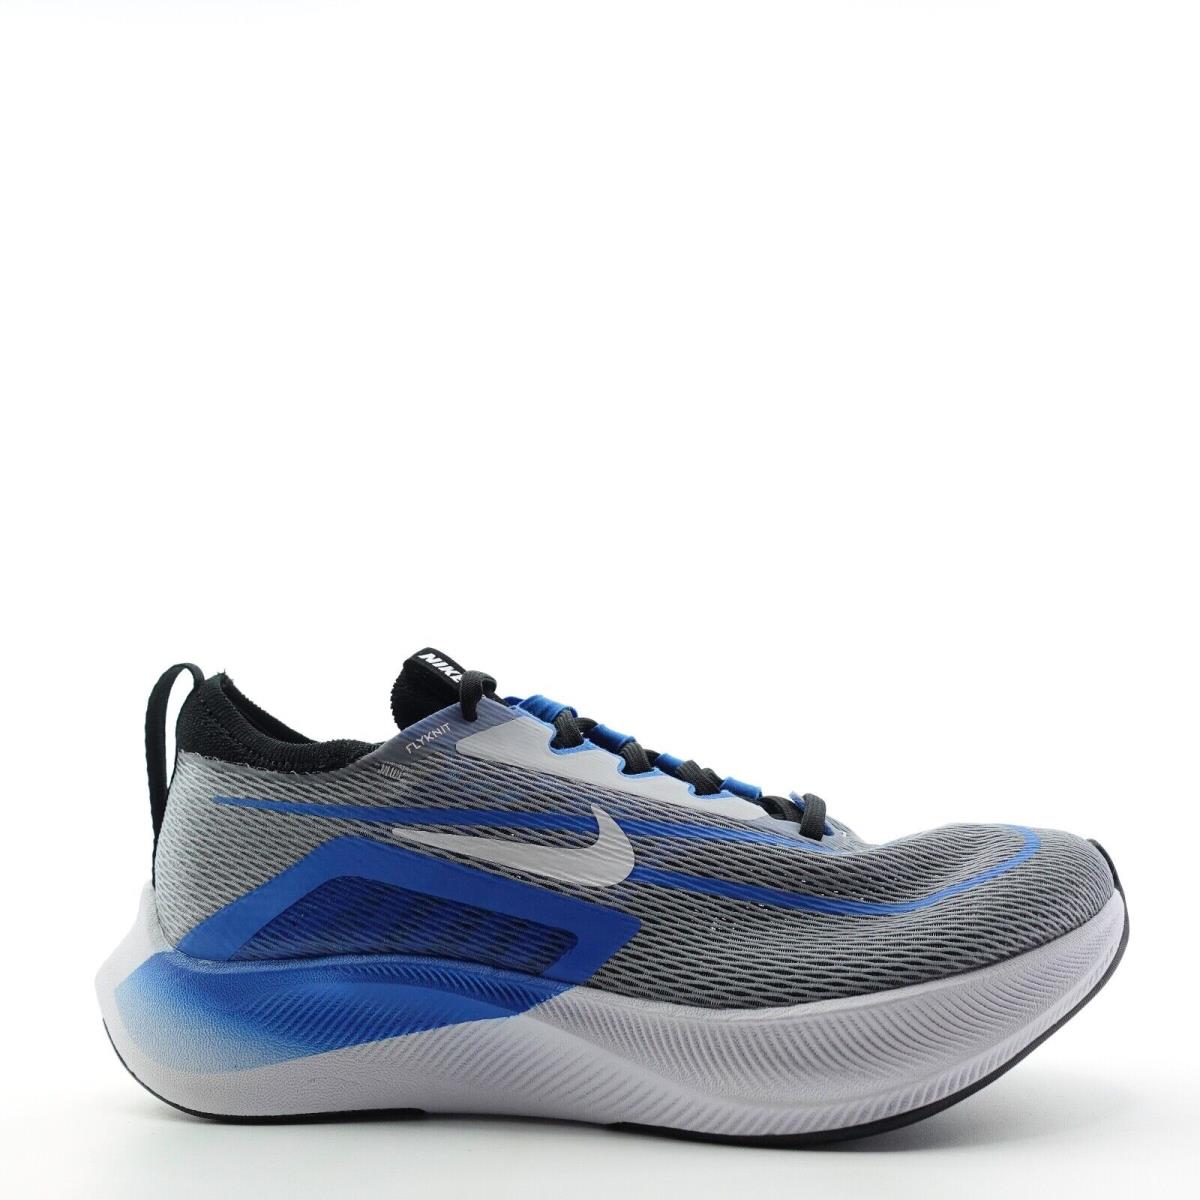 Nike Zoom Fly 4 Wolf Grey Blue Running Shoes Mens Size 8.5 CT2392 005